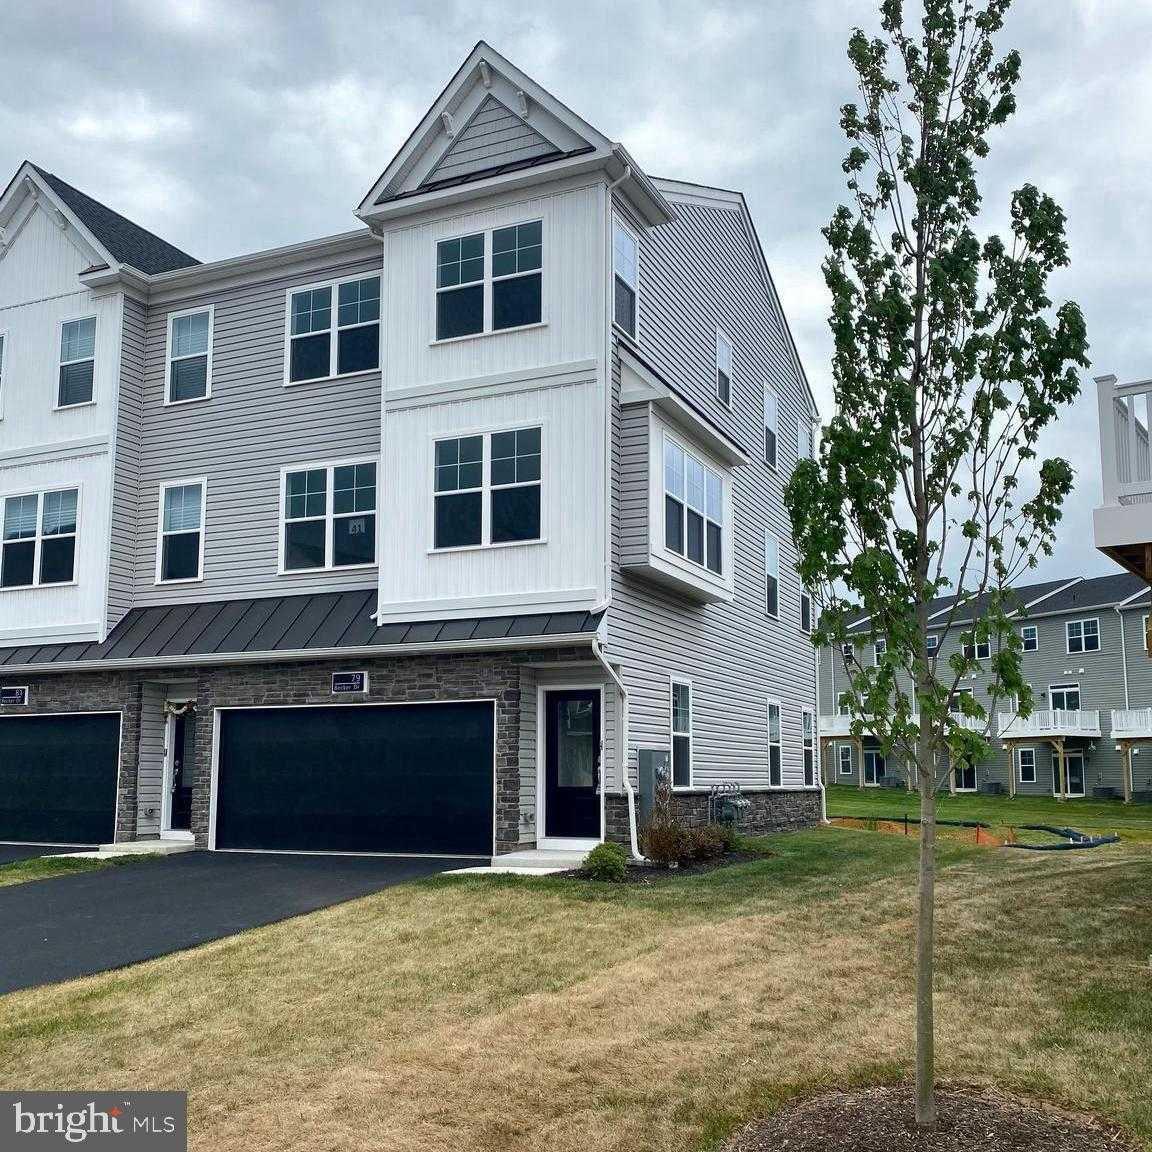 View CHALFONT, PA 18914 townhome